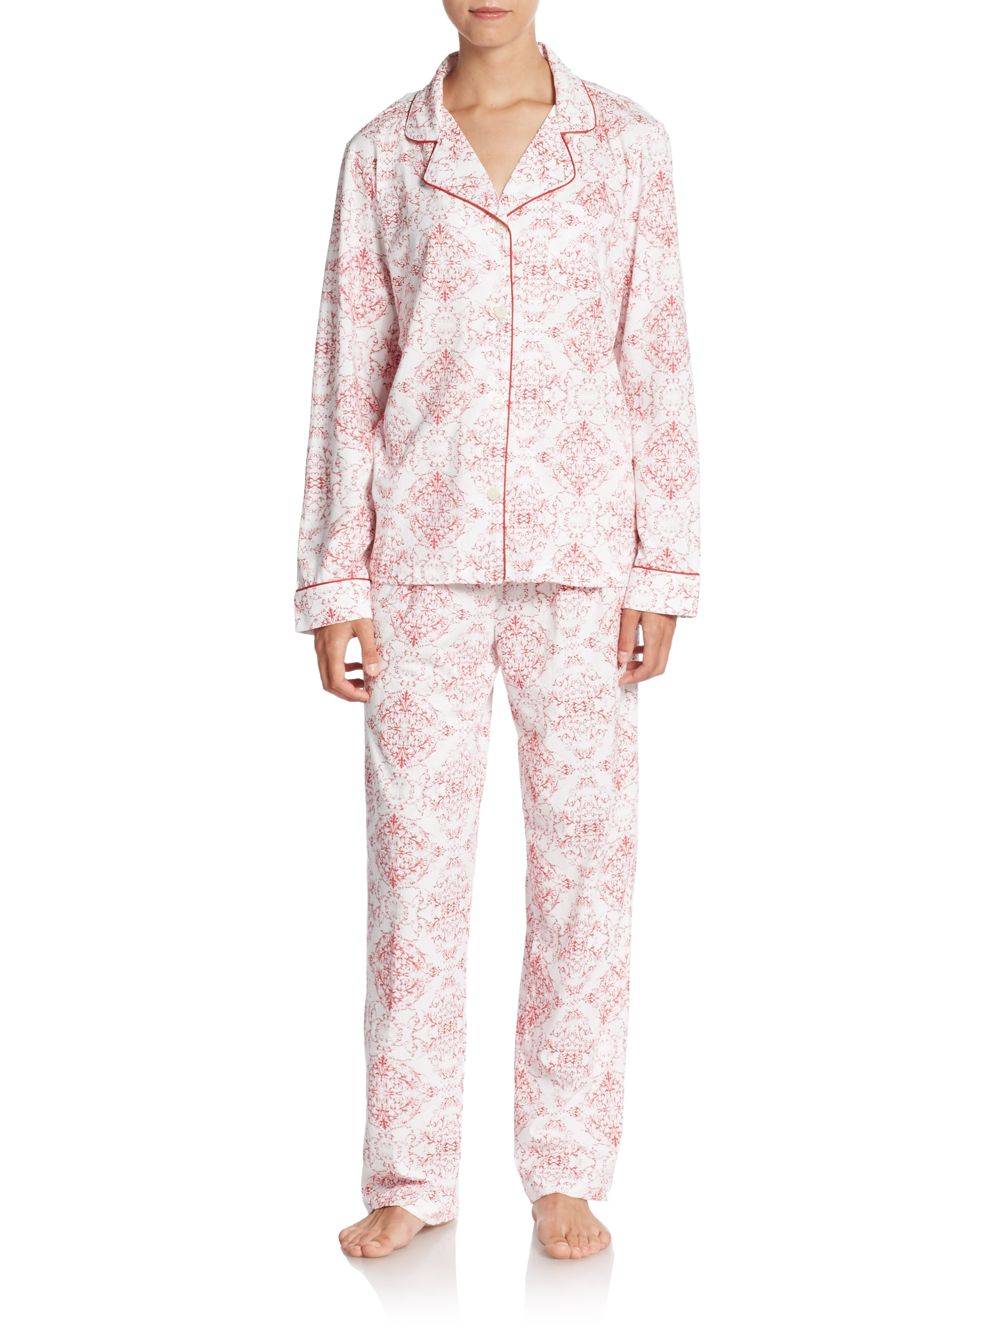 Lyst - Cottonista Notched Collar Pima Cotton Pajama Set in Pink